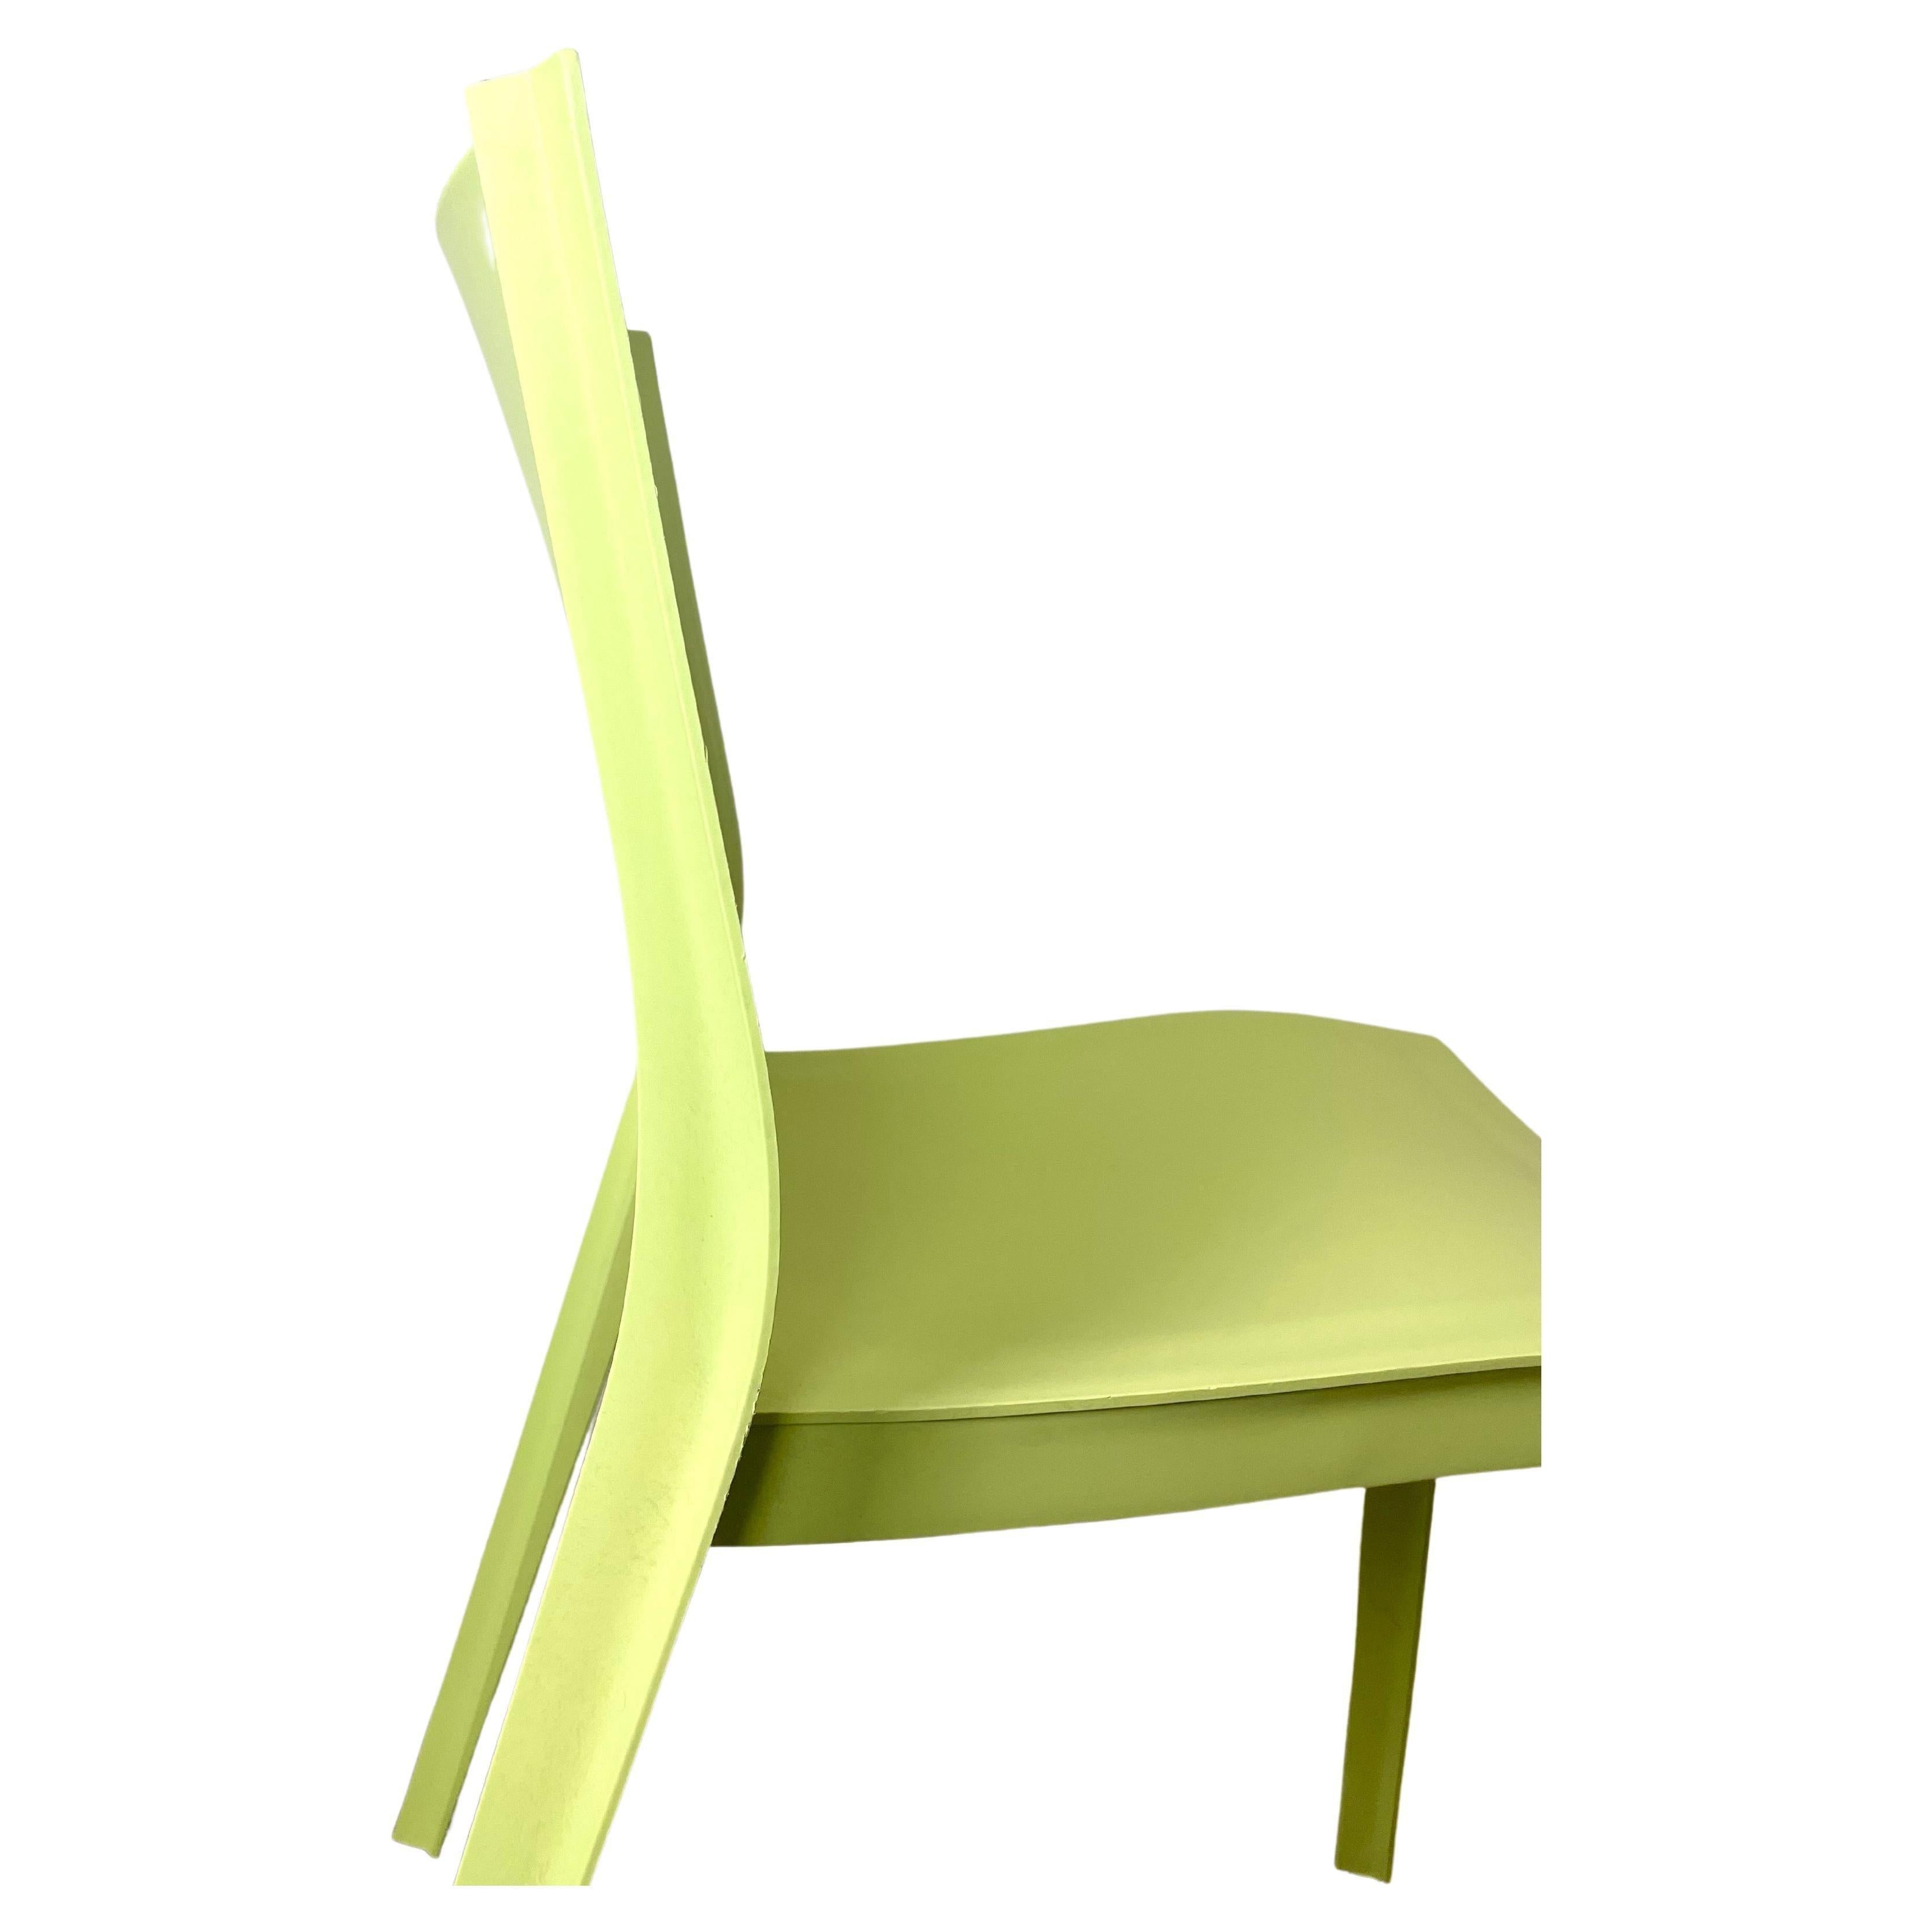 Late 20th Century Philippe Starck, Set of 2 French Green Chairs, Design Slick Slick XO - France For Sale